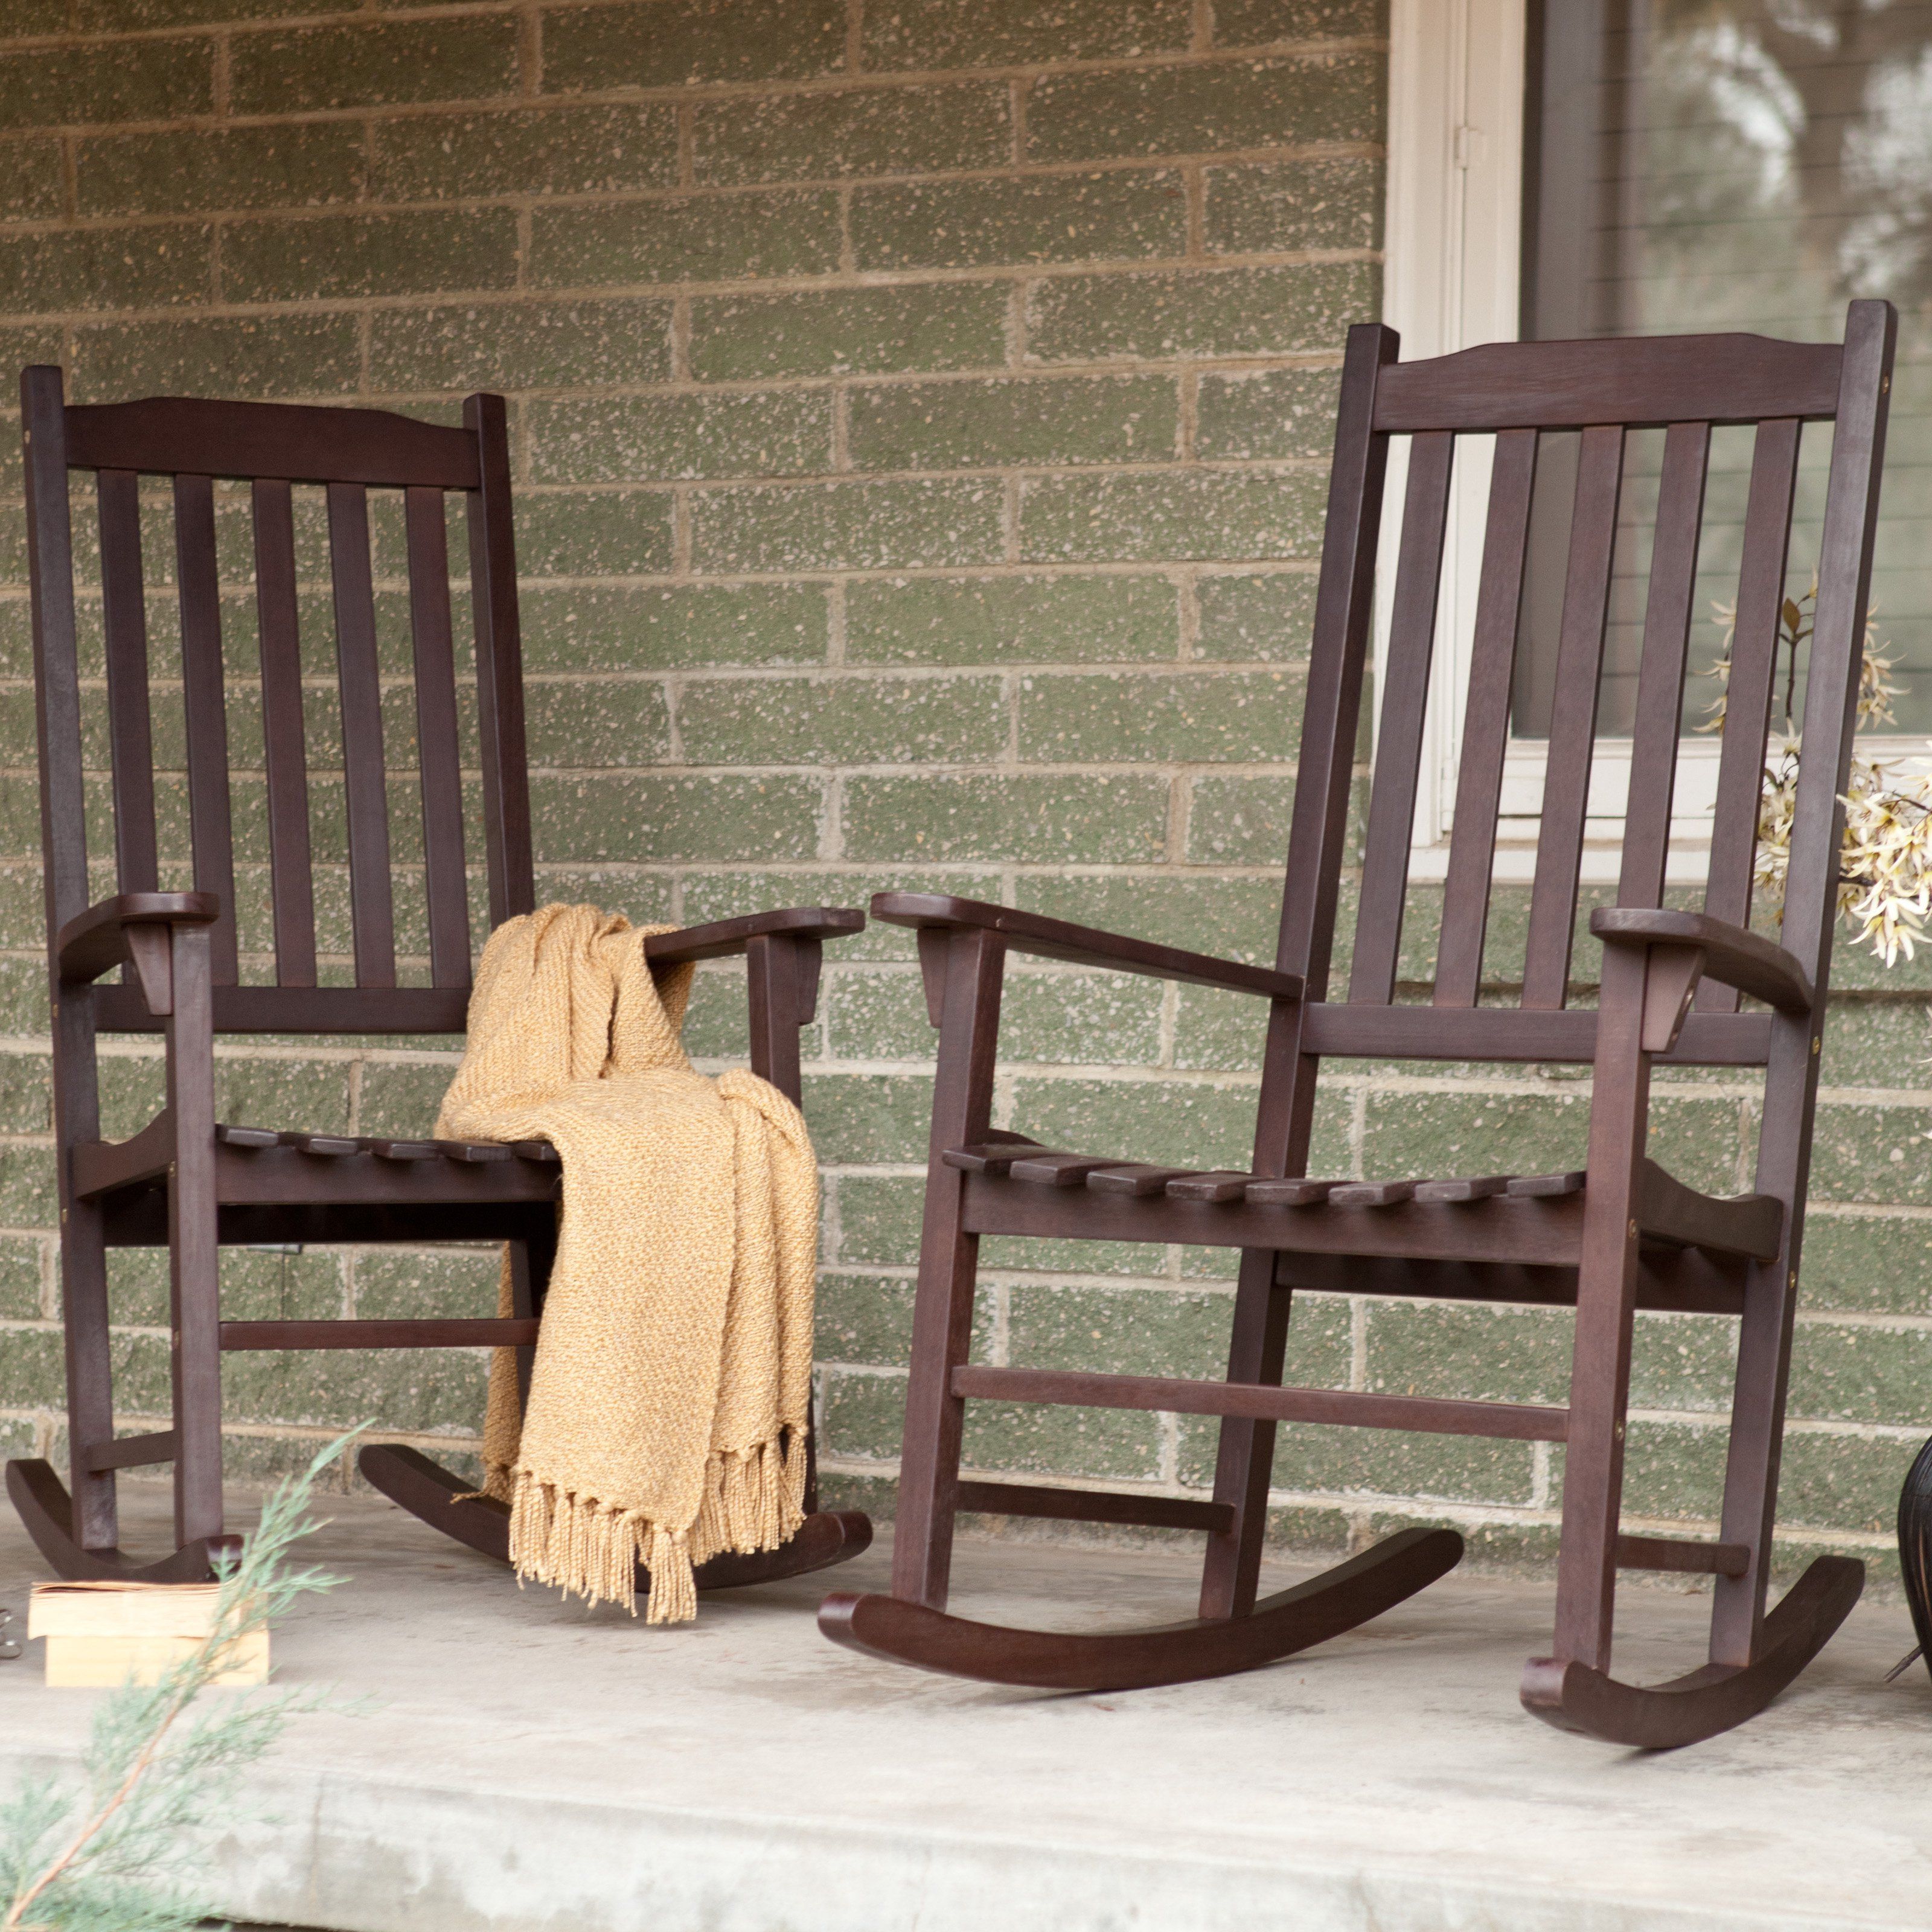 Mission Style Rocking Chair: History And Designs | Homesfeed In Elegant Tobacco Brown Wooden Rocking Chairs (Photo 15 of 20)